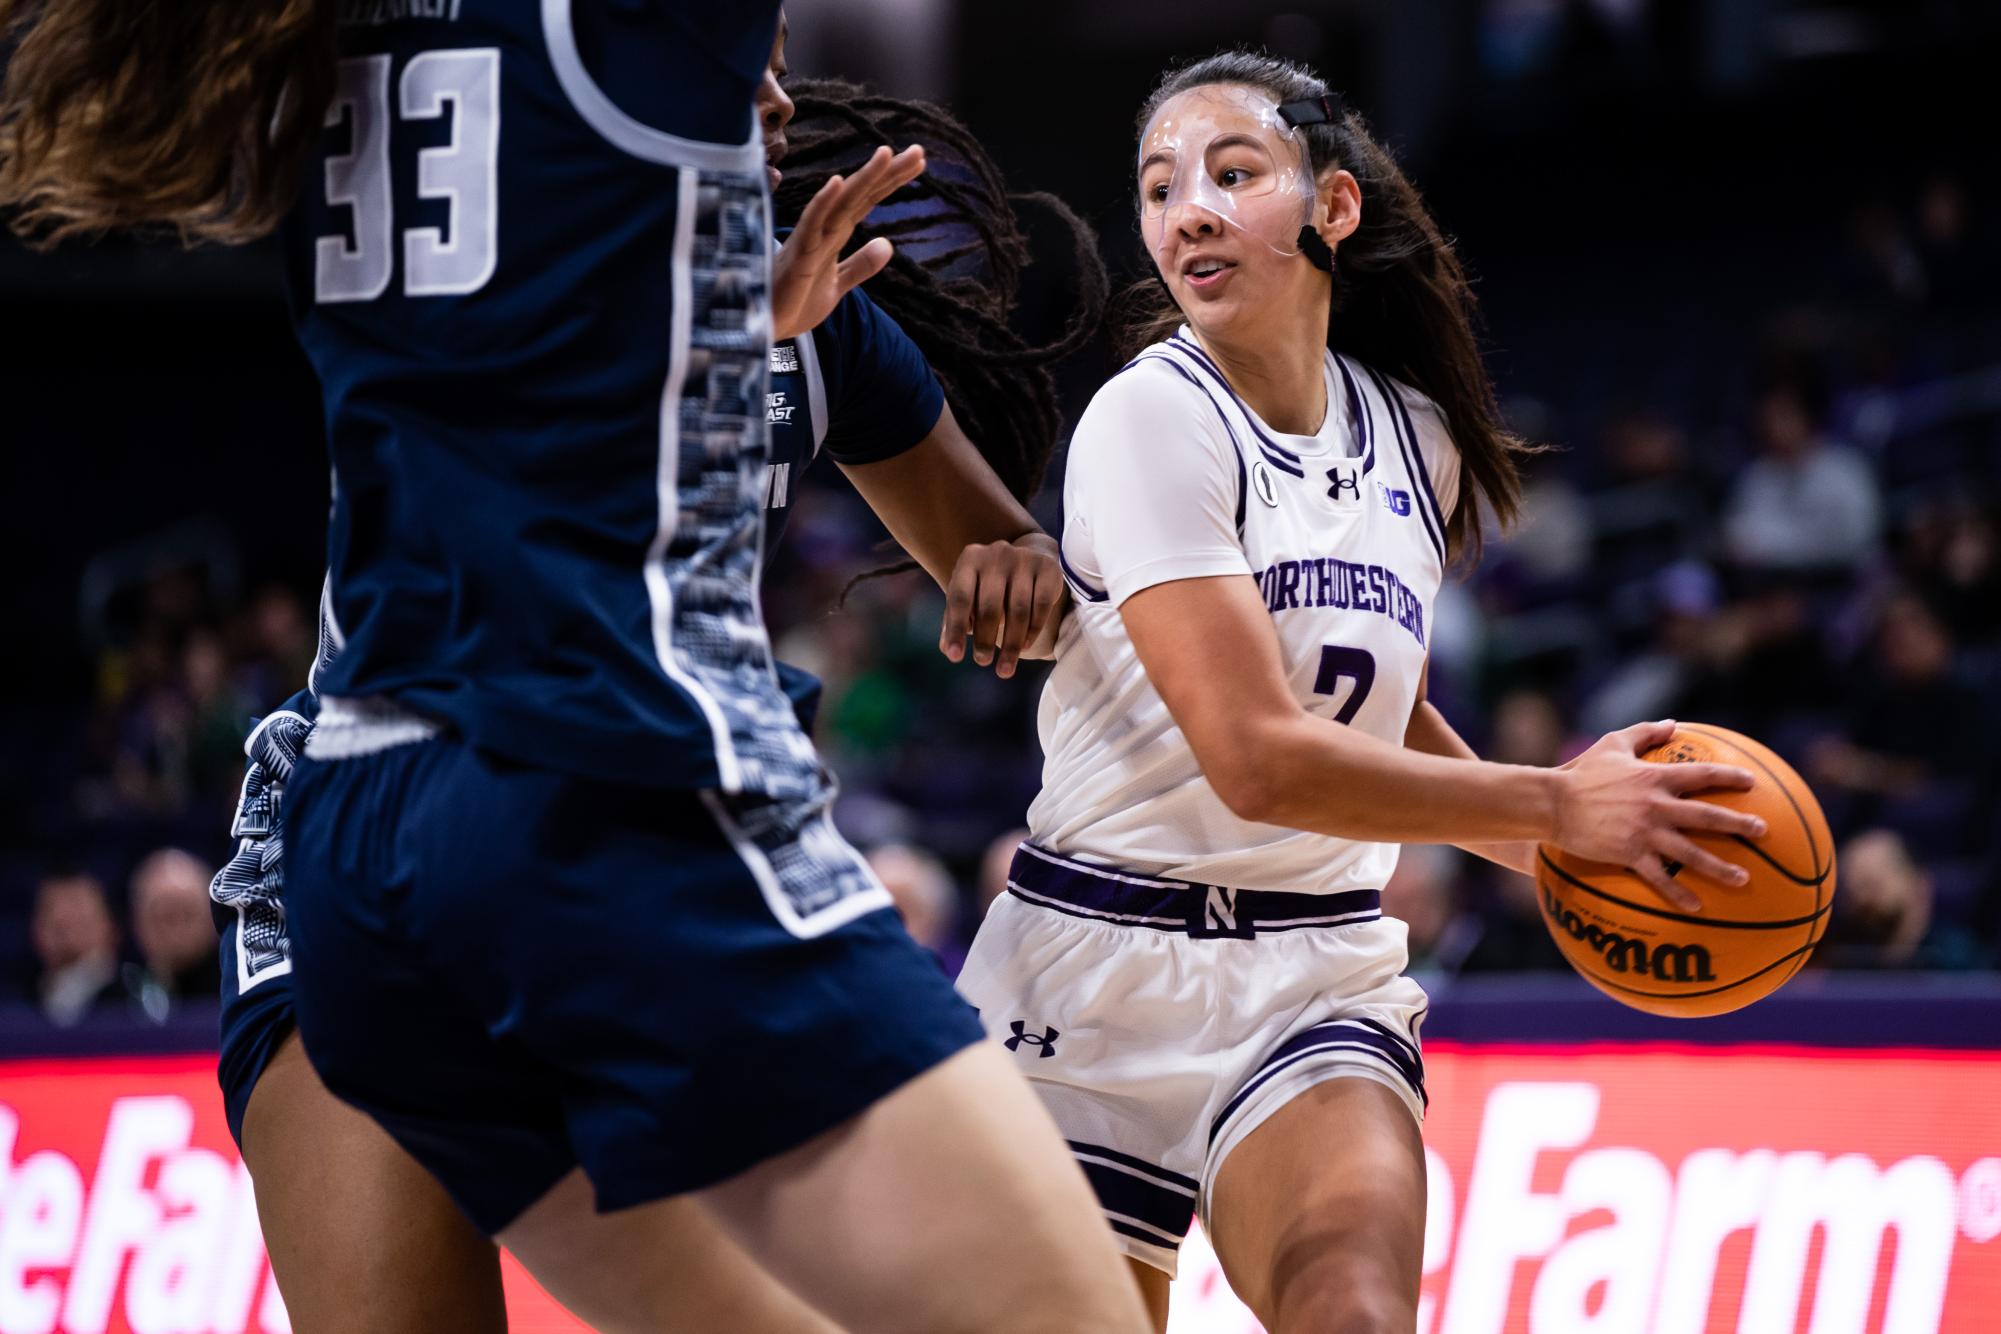 Sophomore guard Caroline Lau. Lau notched 11 points and five assists in Northwesterns 82-58 loss to Georgetown Sunday.